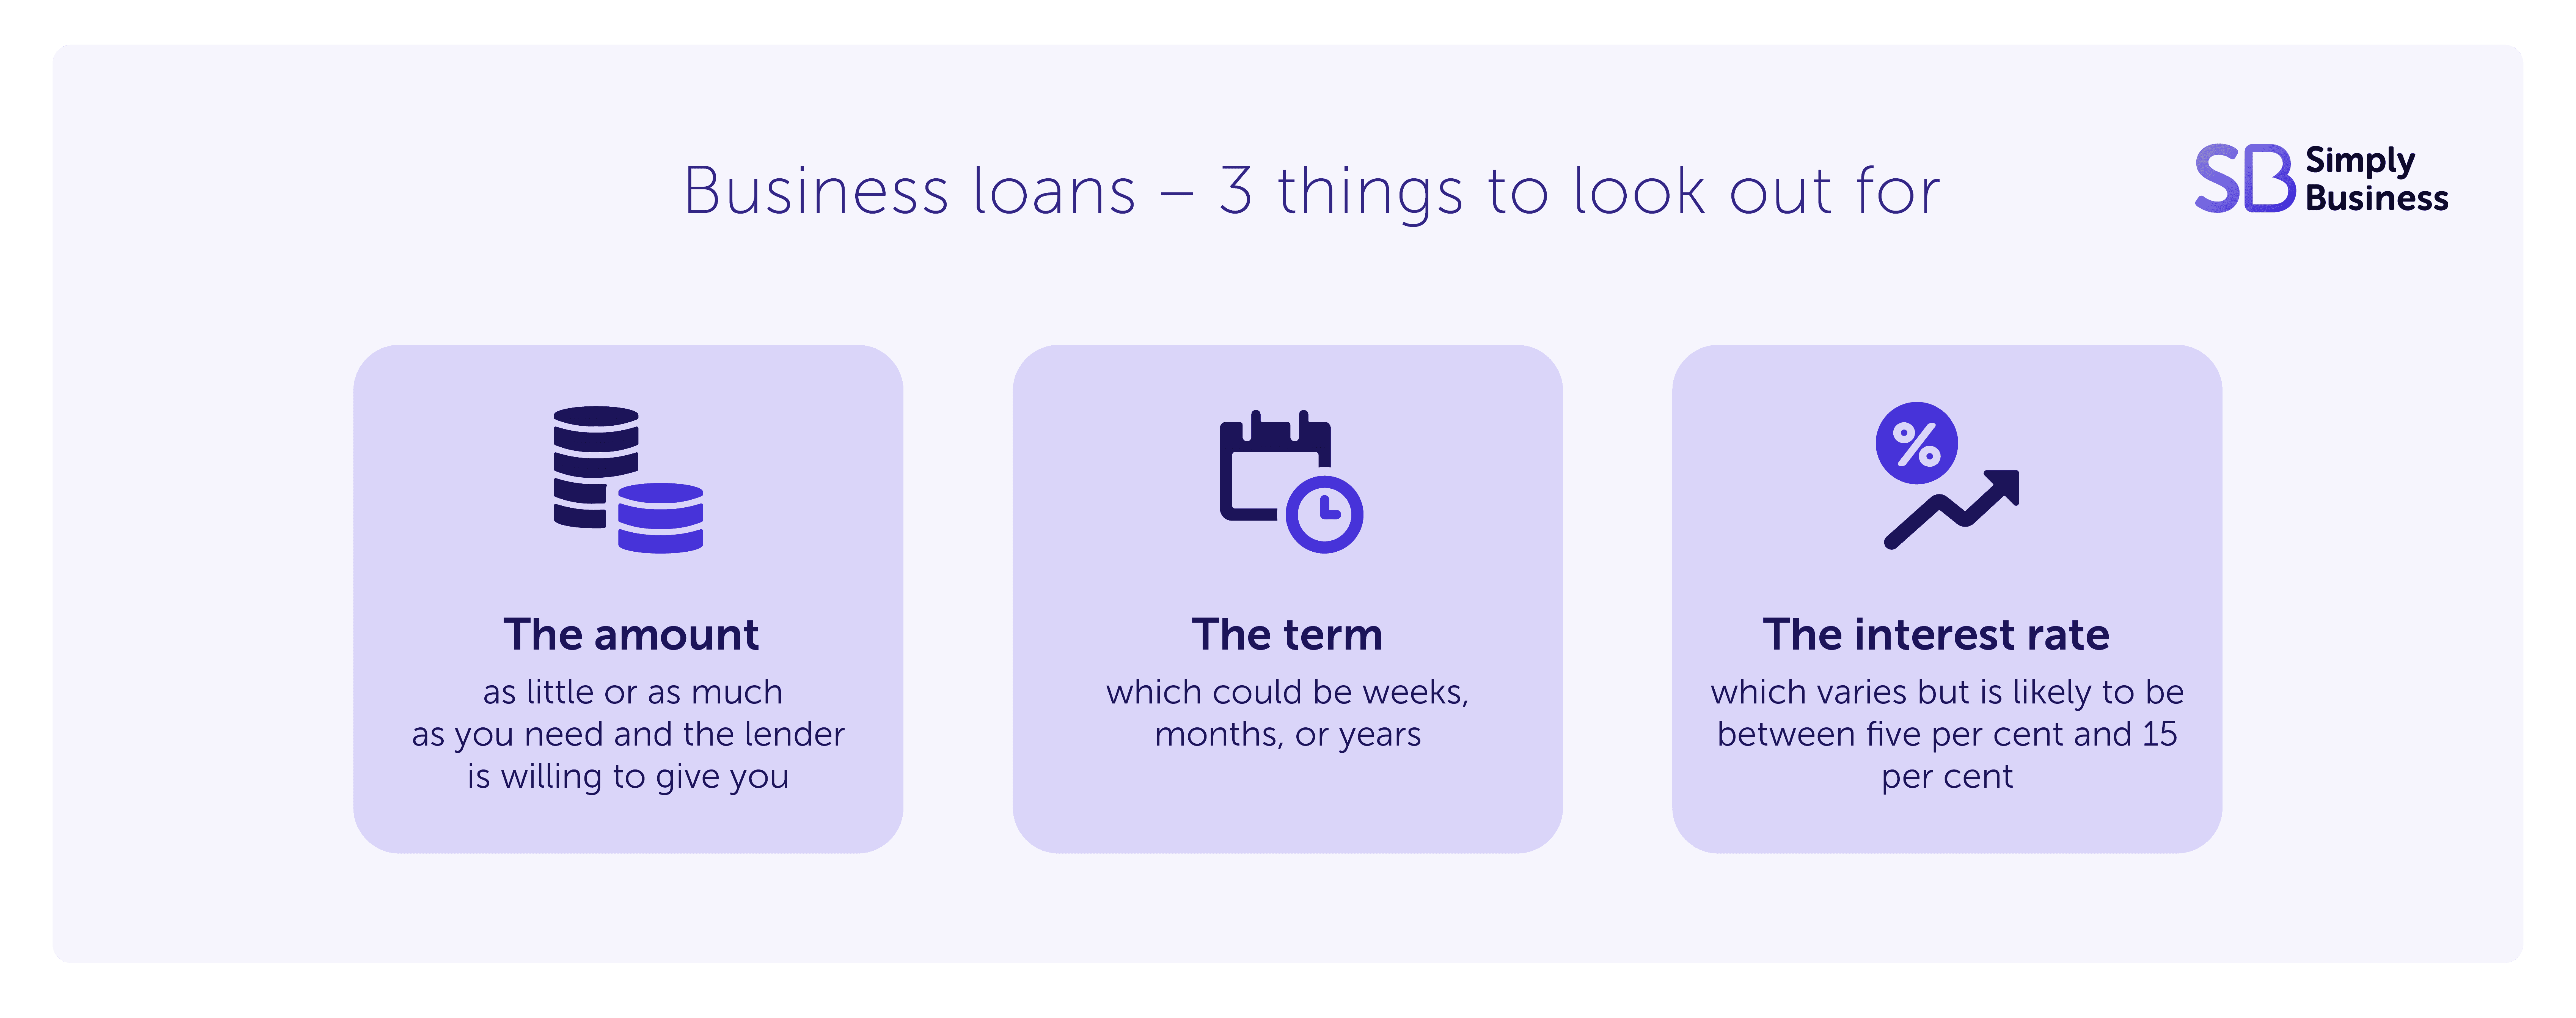 Infographic showing three things to look out for when getting a business loan